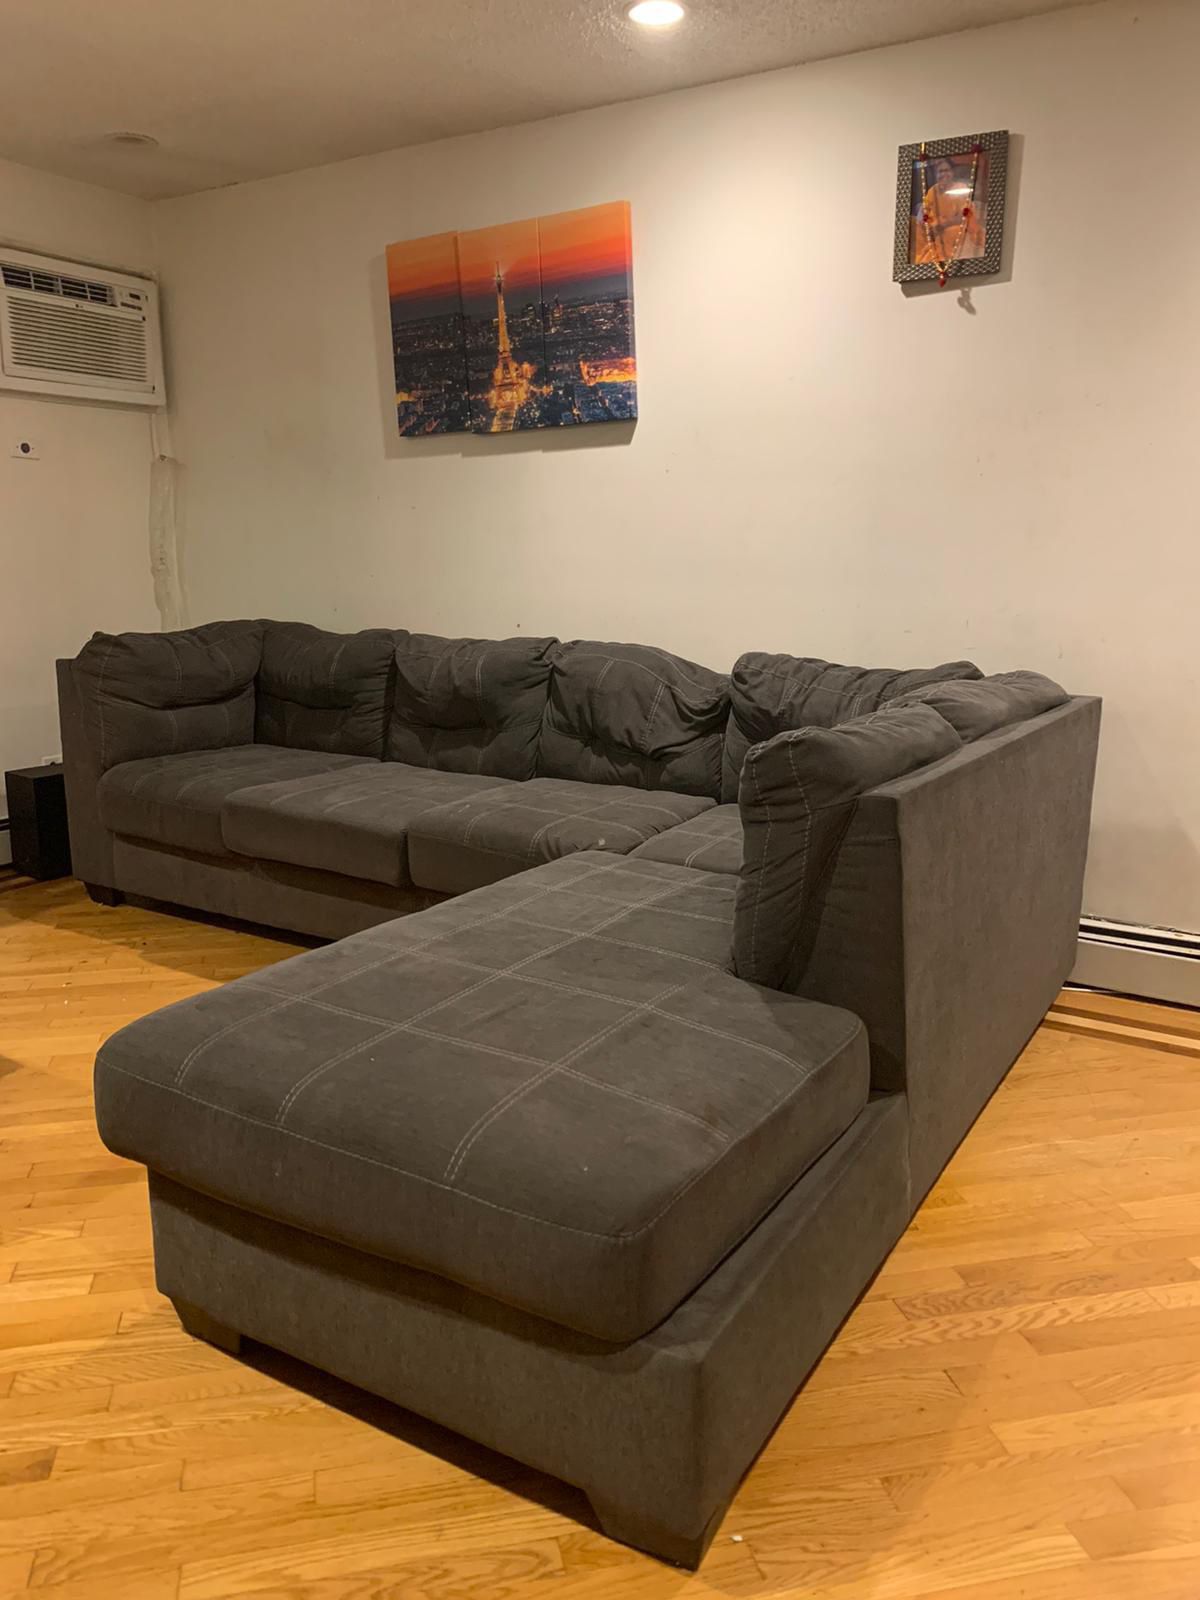 Sectional L-shaped Gray Sofa. Being Sold in As-is Condition 